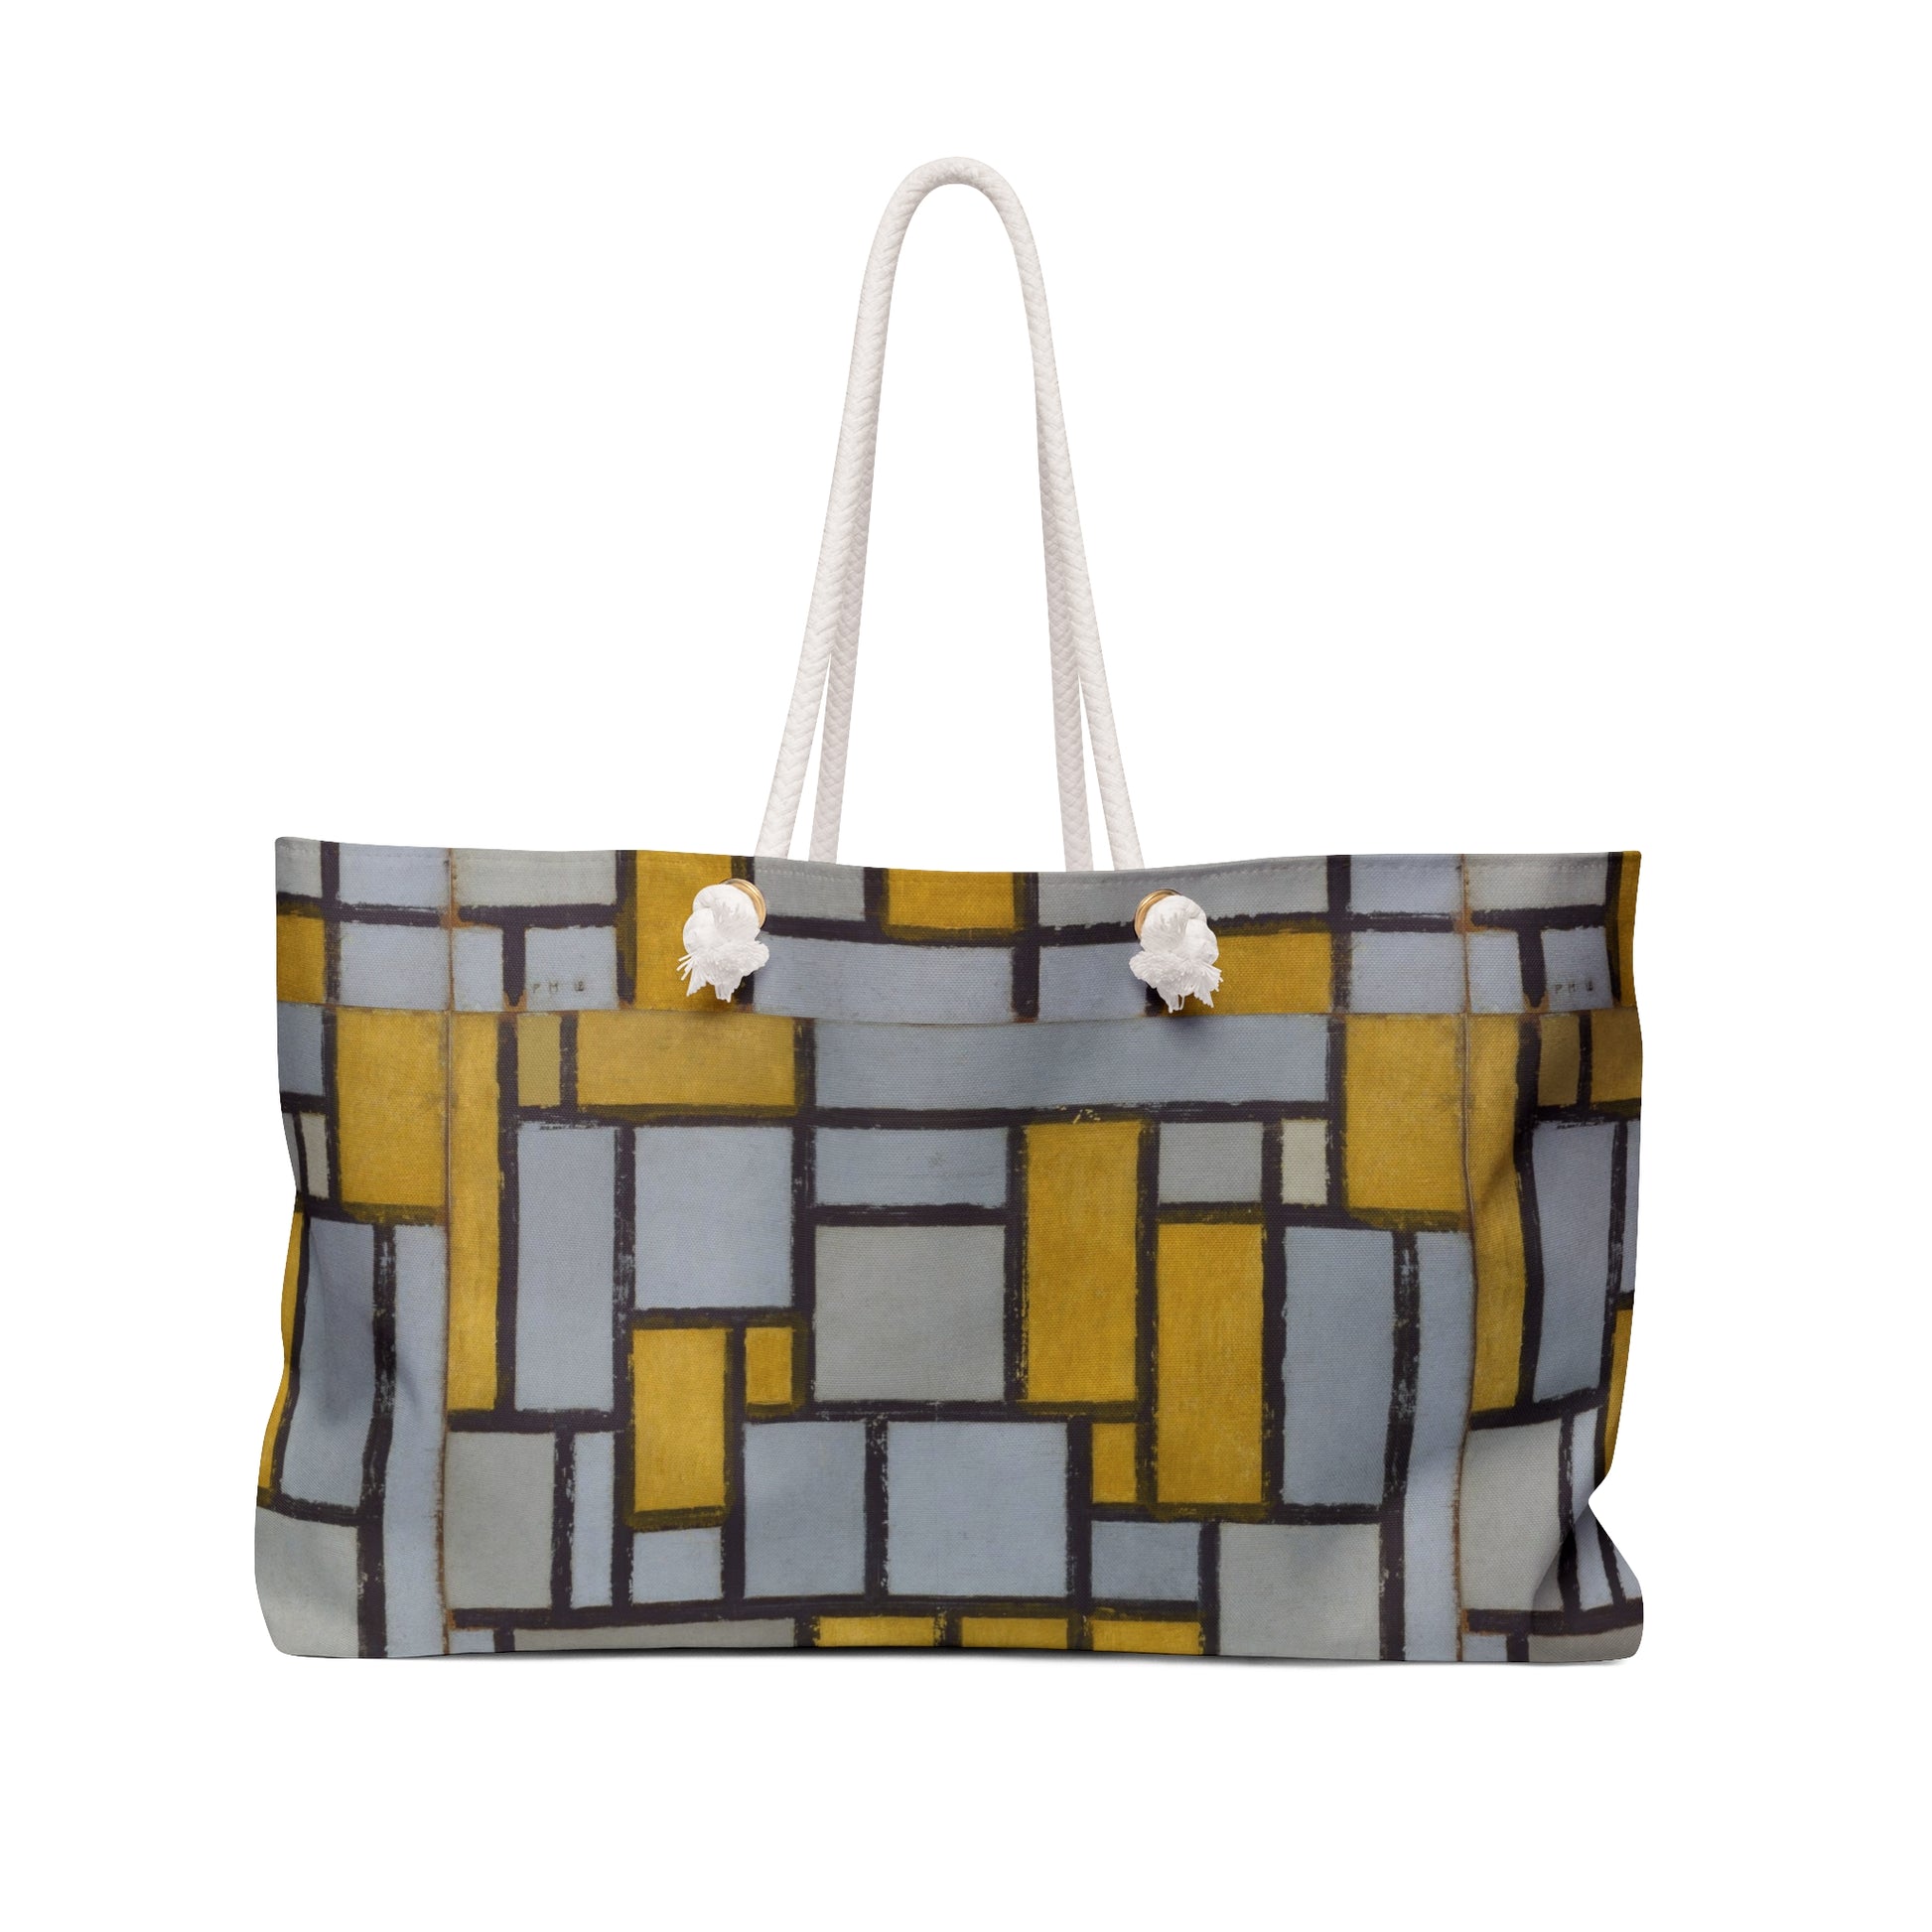 PIET MONDRIAN - COMPOSITION WITH GRID No. 1 - WEEKENDER TOTE BAG